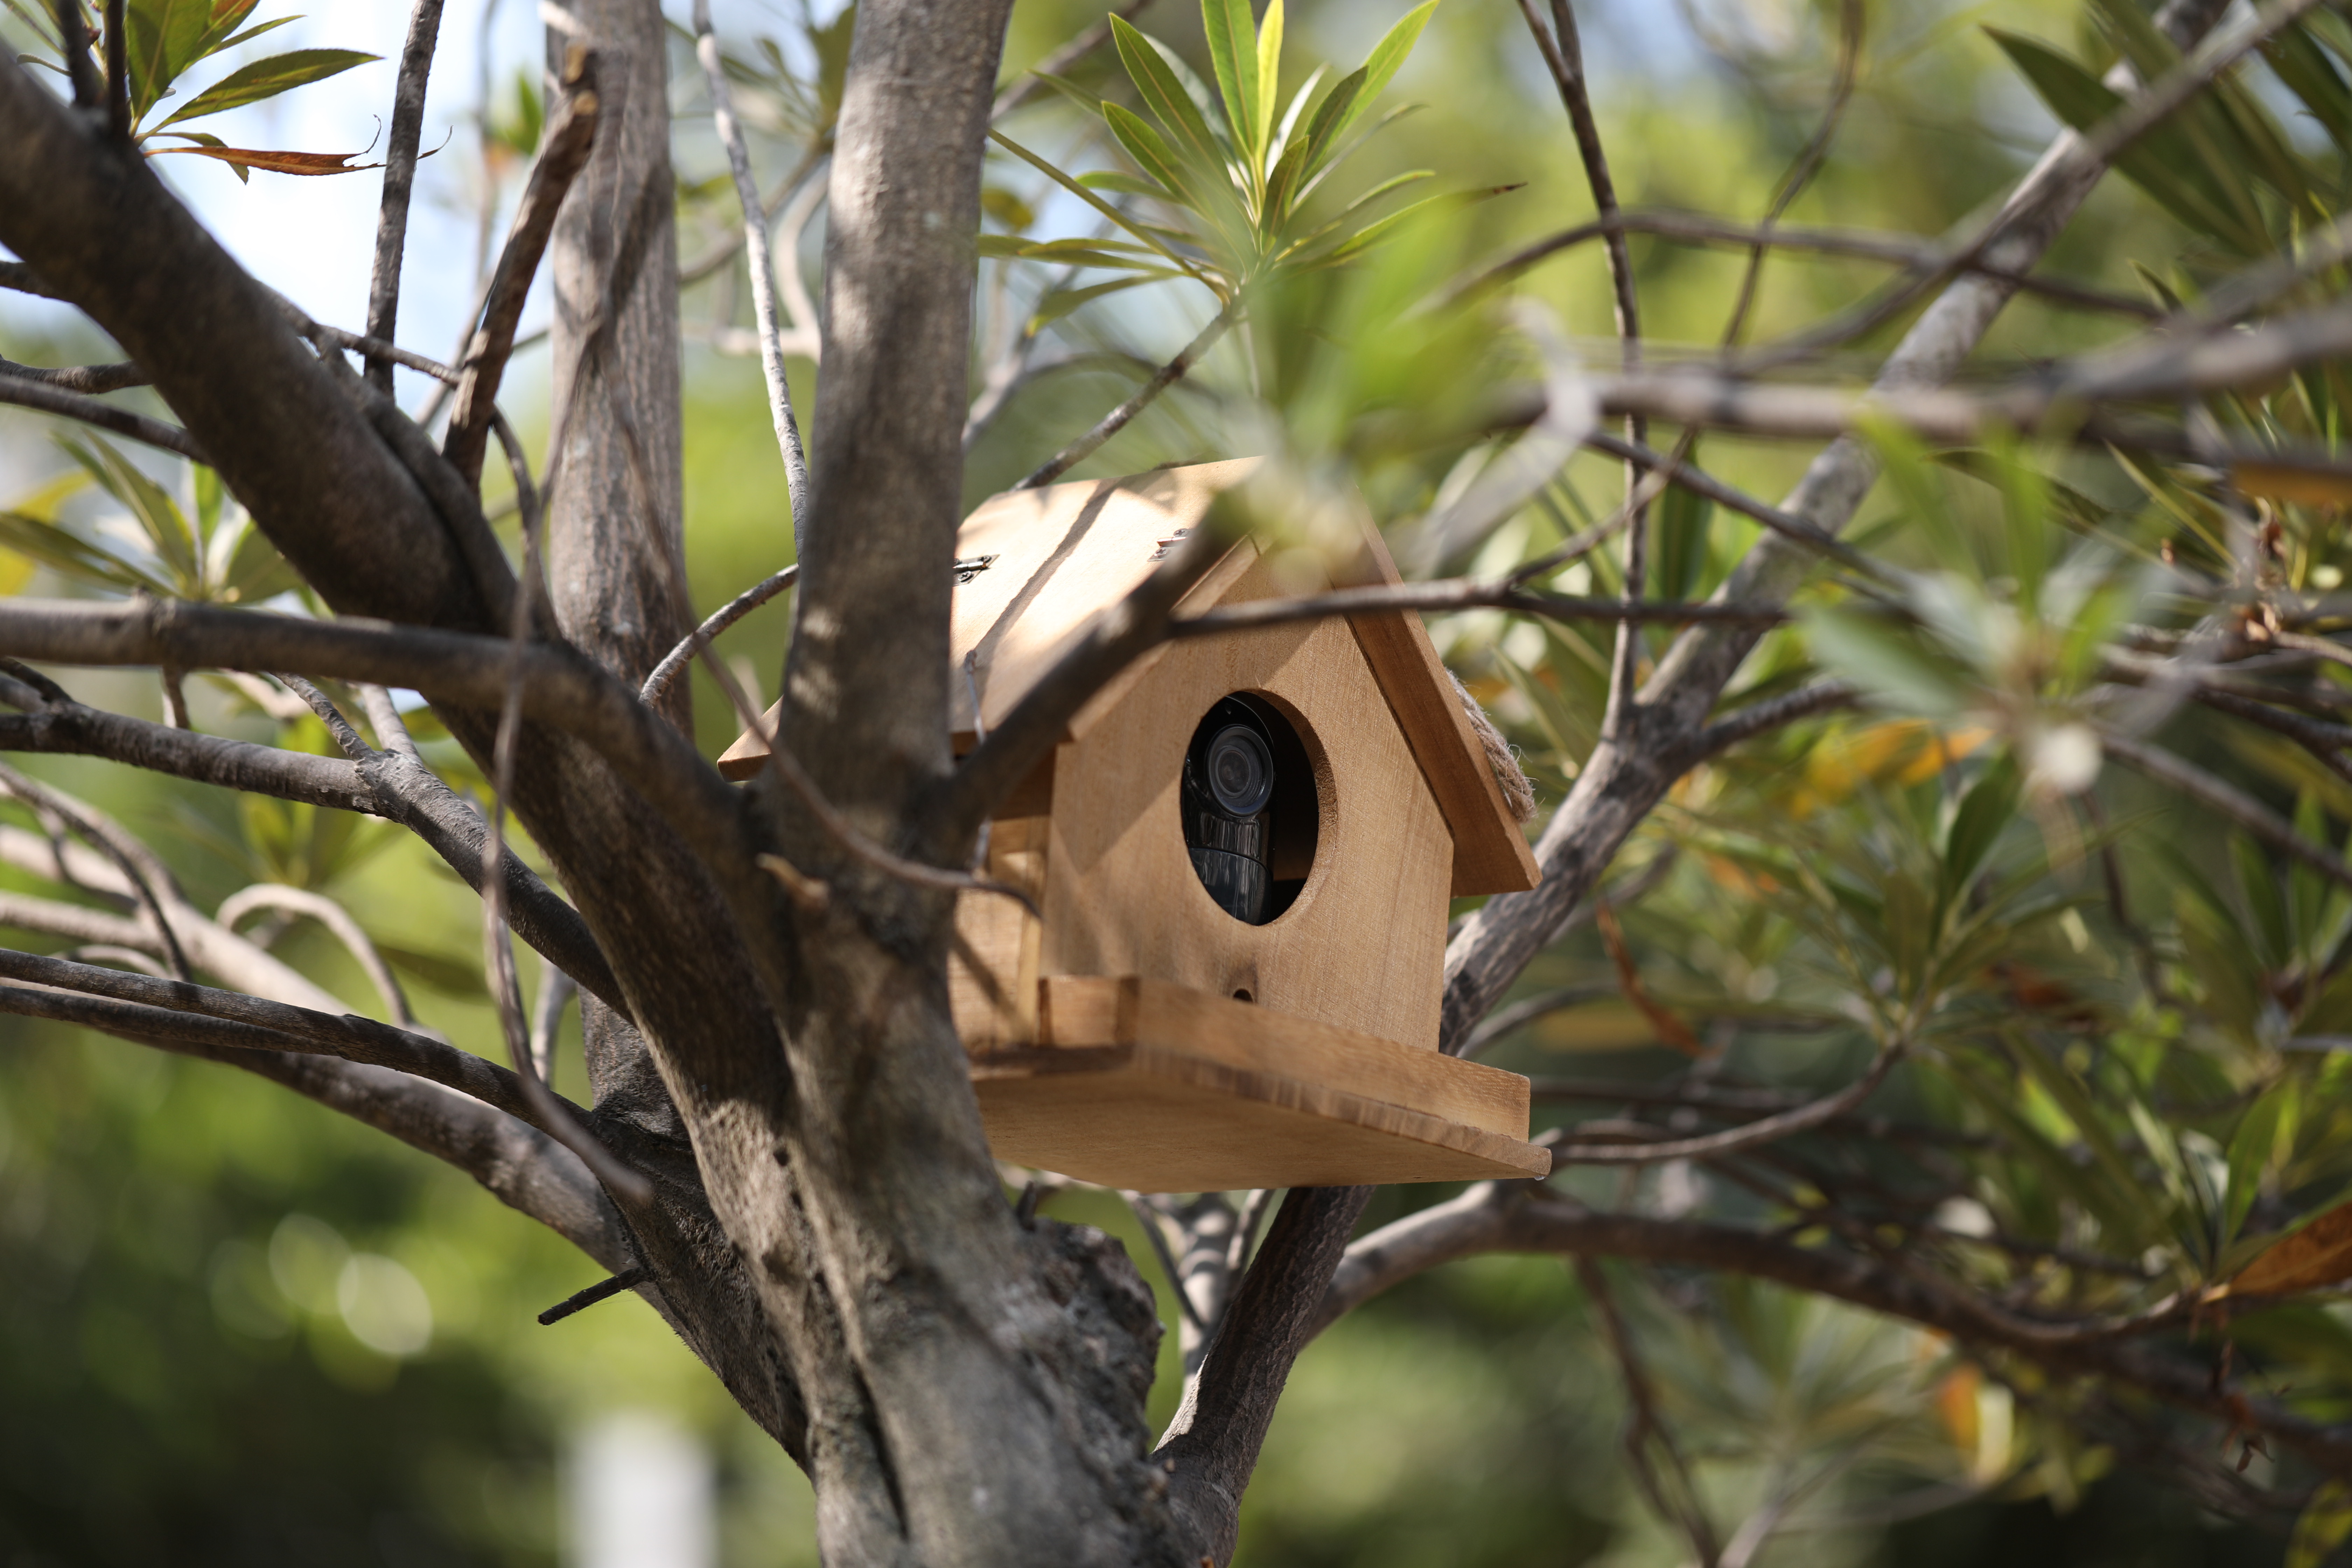 Battery Powered Security Cameras in Birdhouse